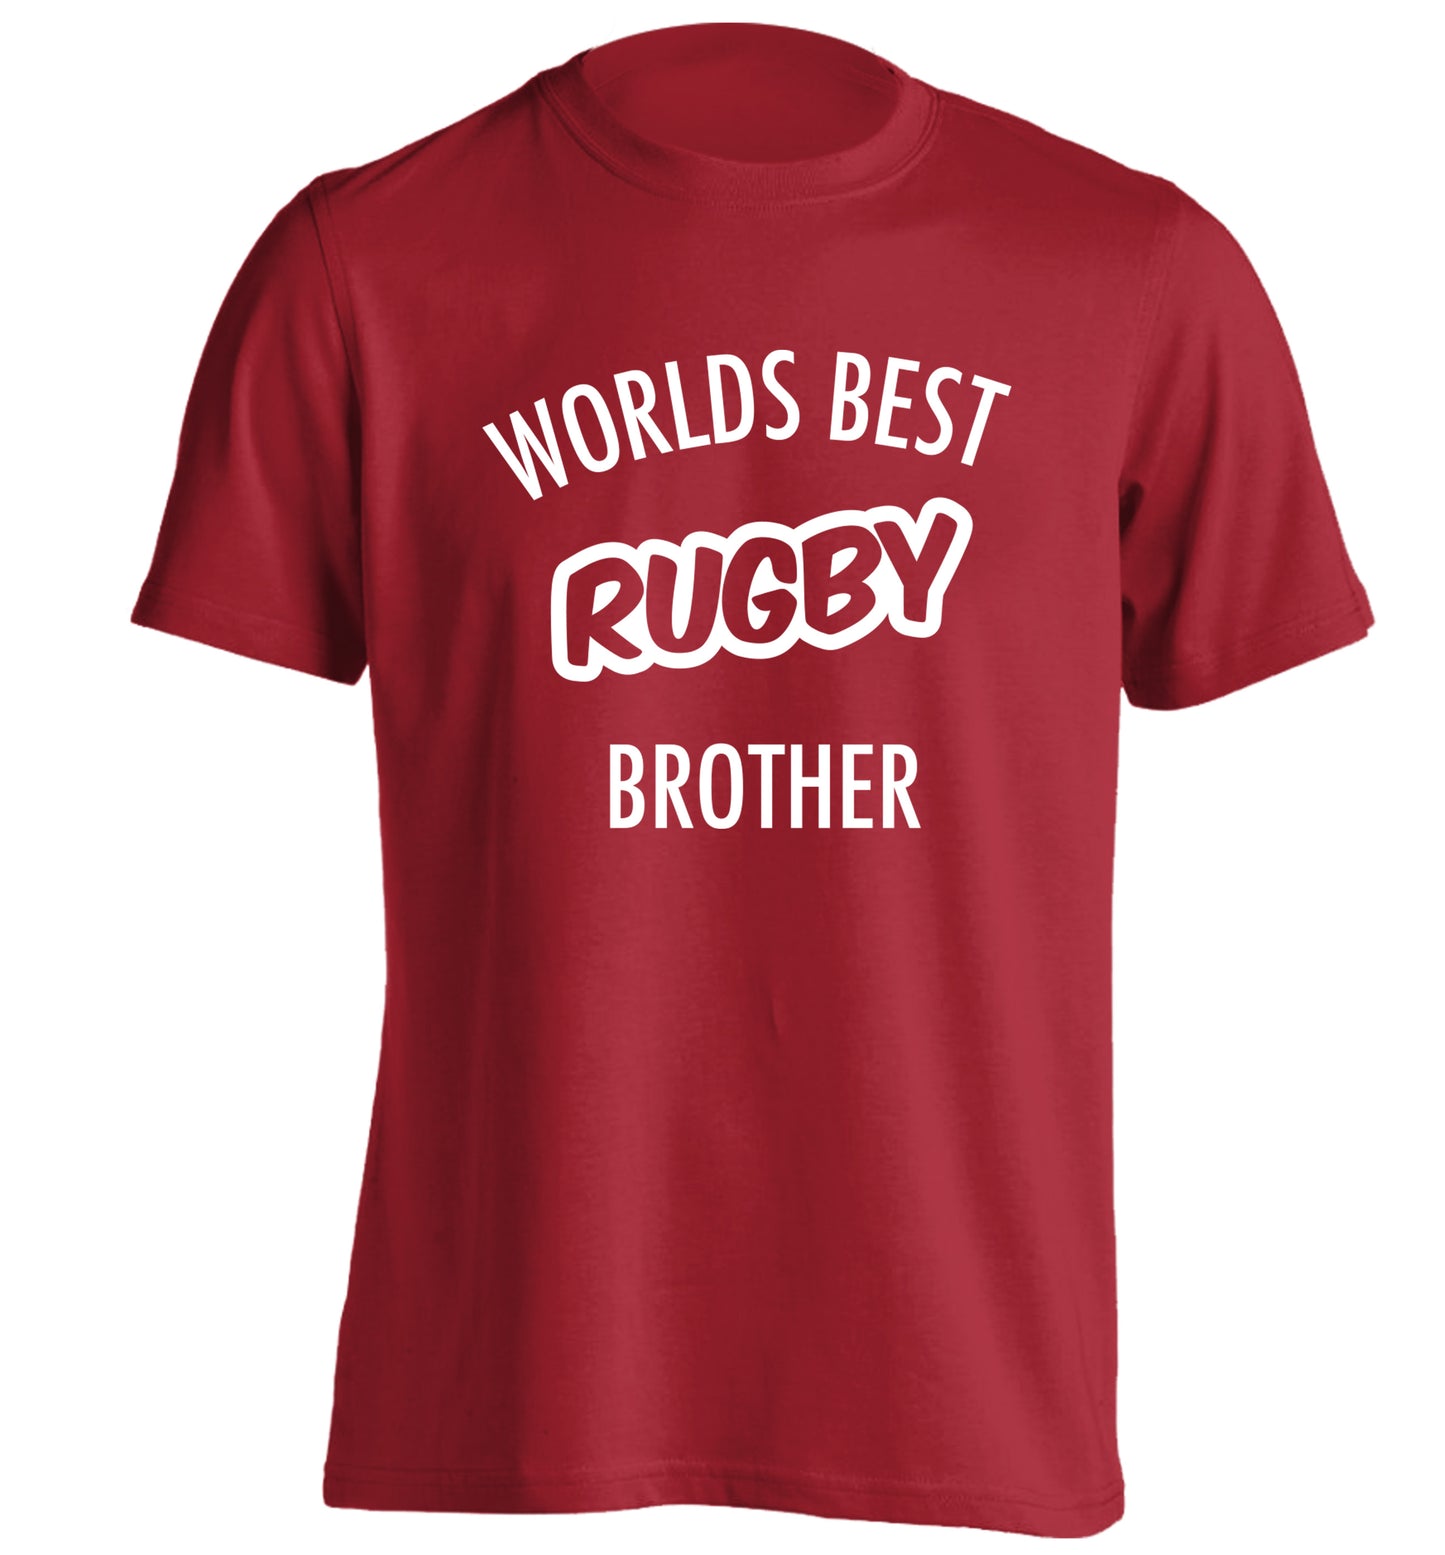 Worlds best rugby brother adults unisex red Tshirt 2XL